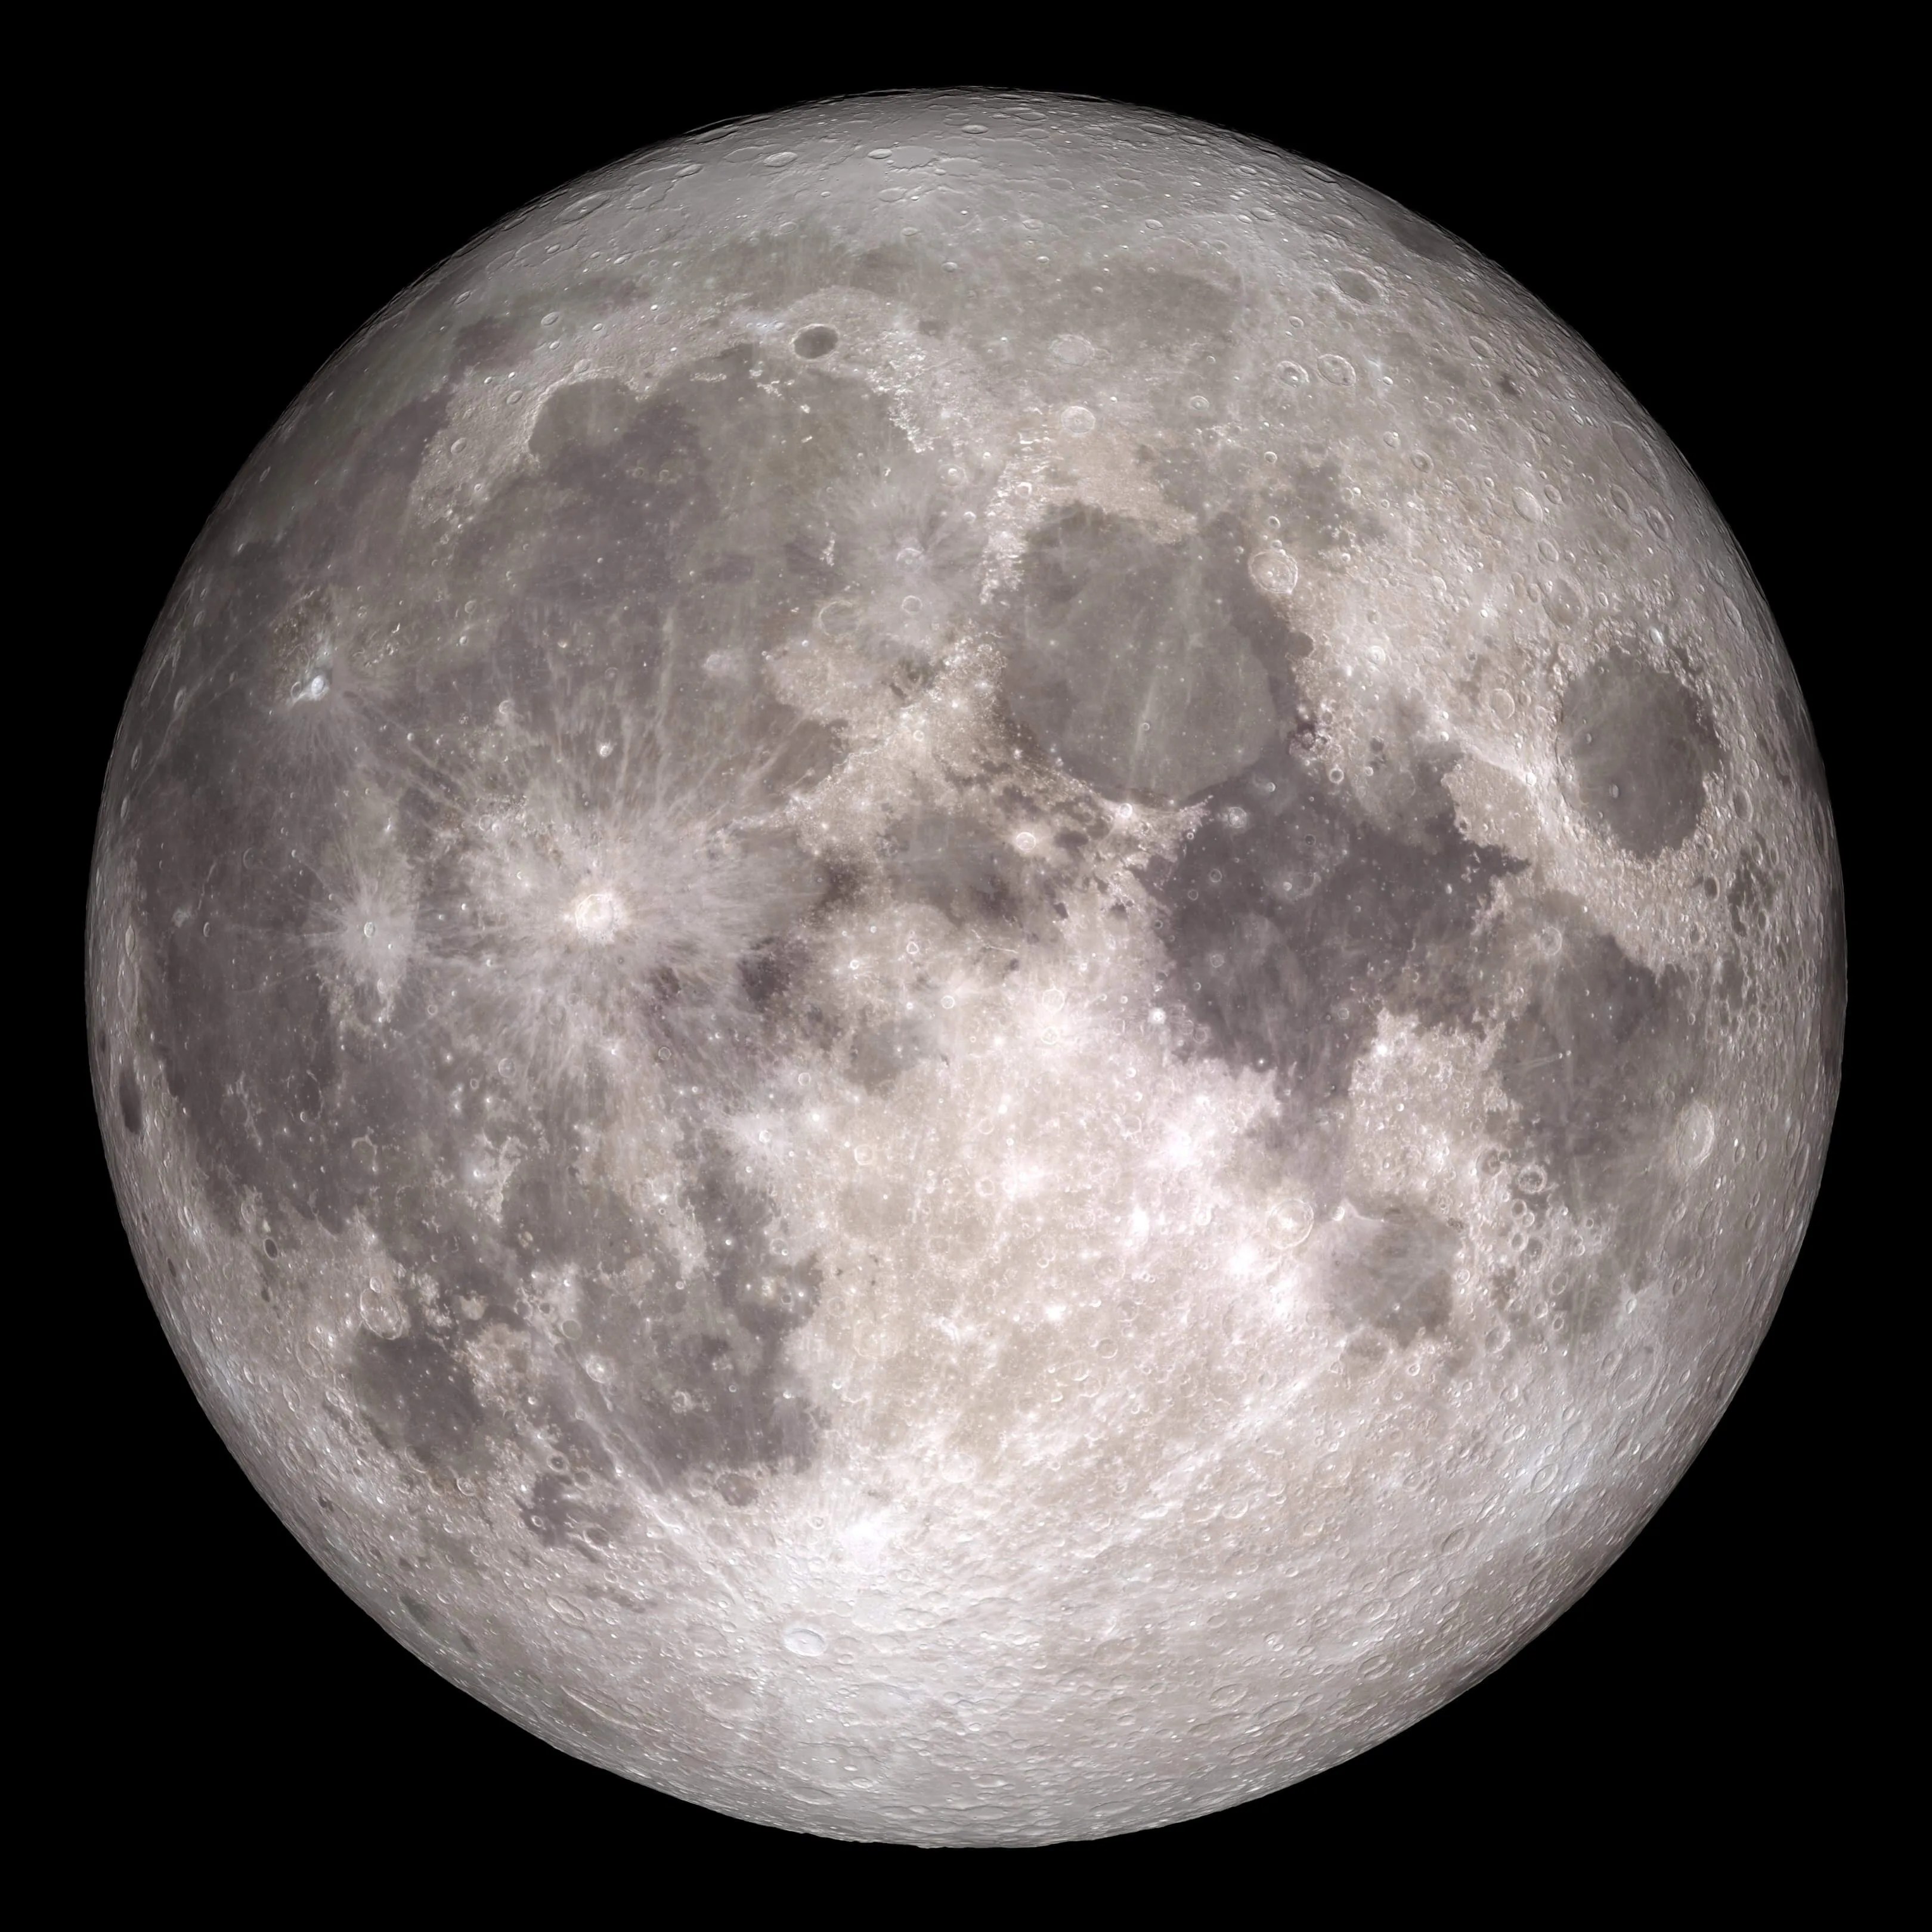 The face of the Moon that we see from Earth